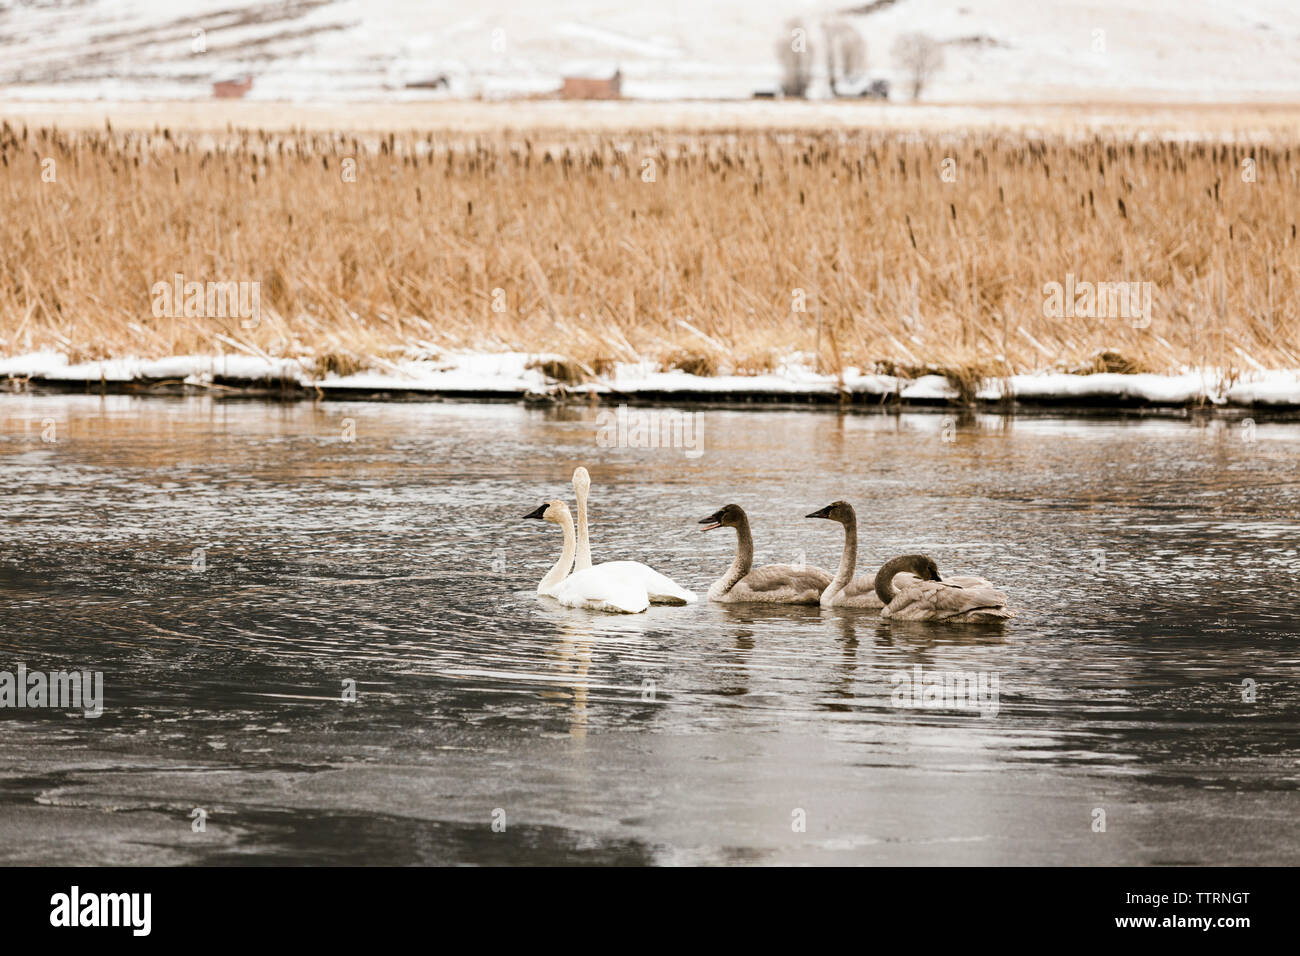 Swans swimming in lake during winter Stock Photo